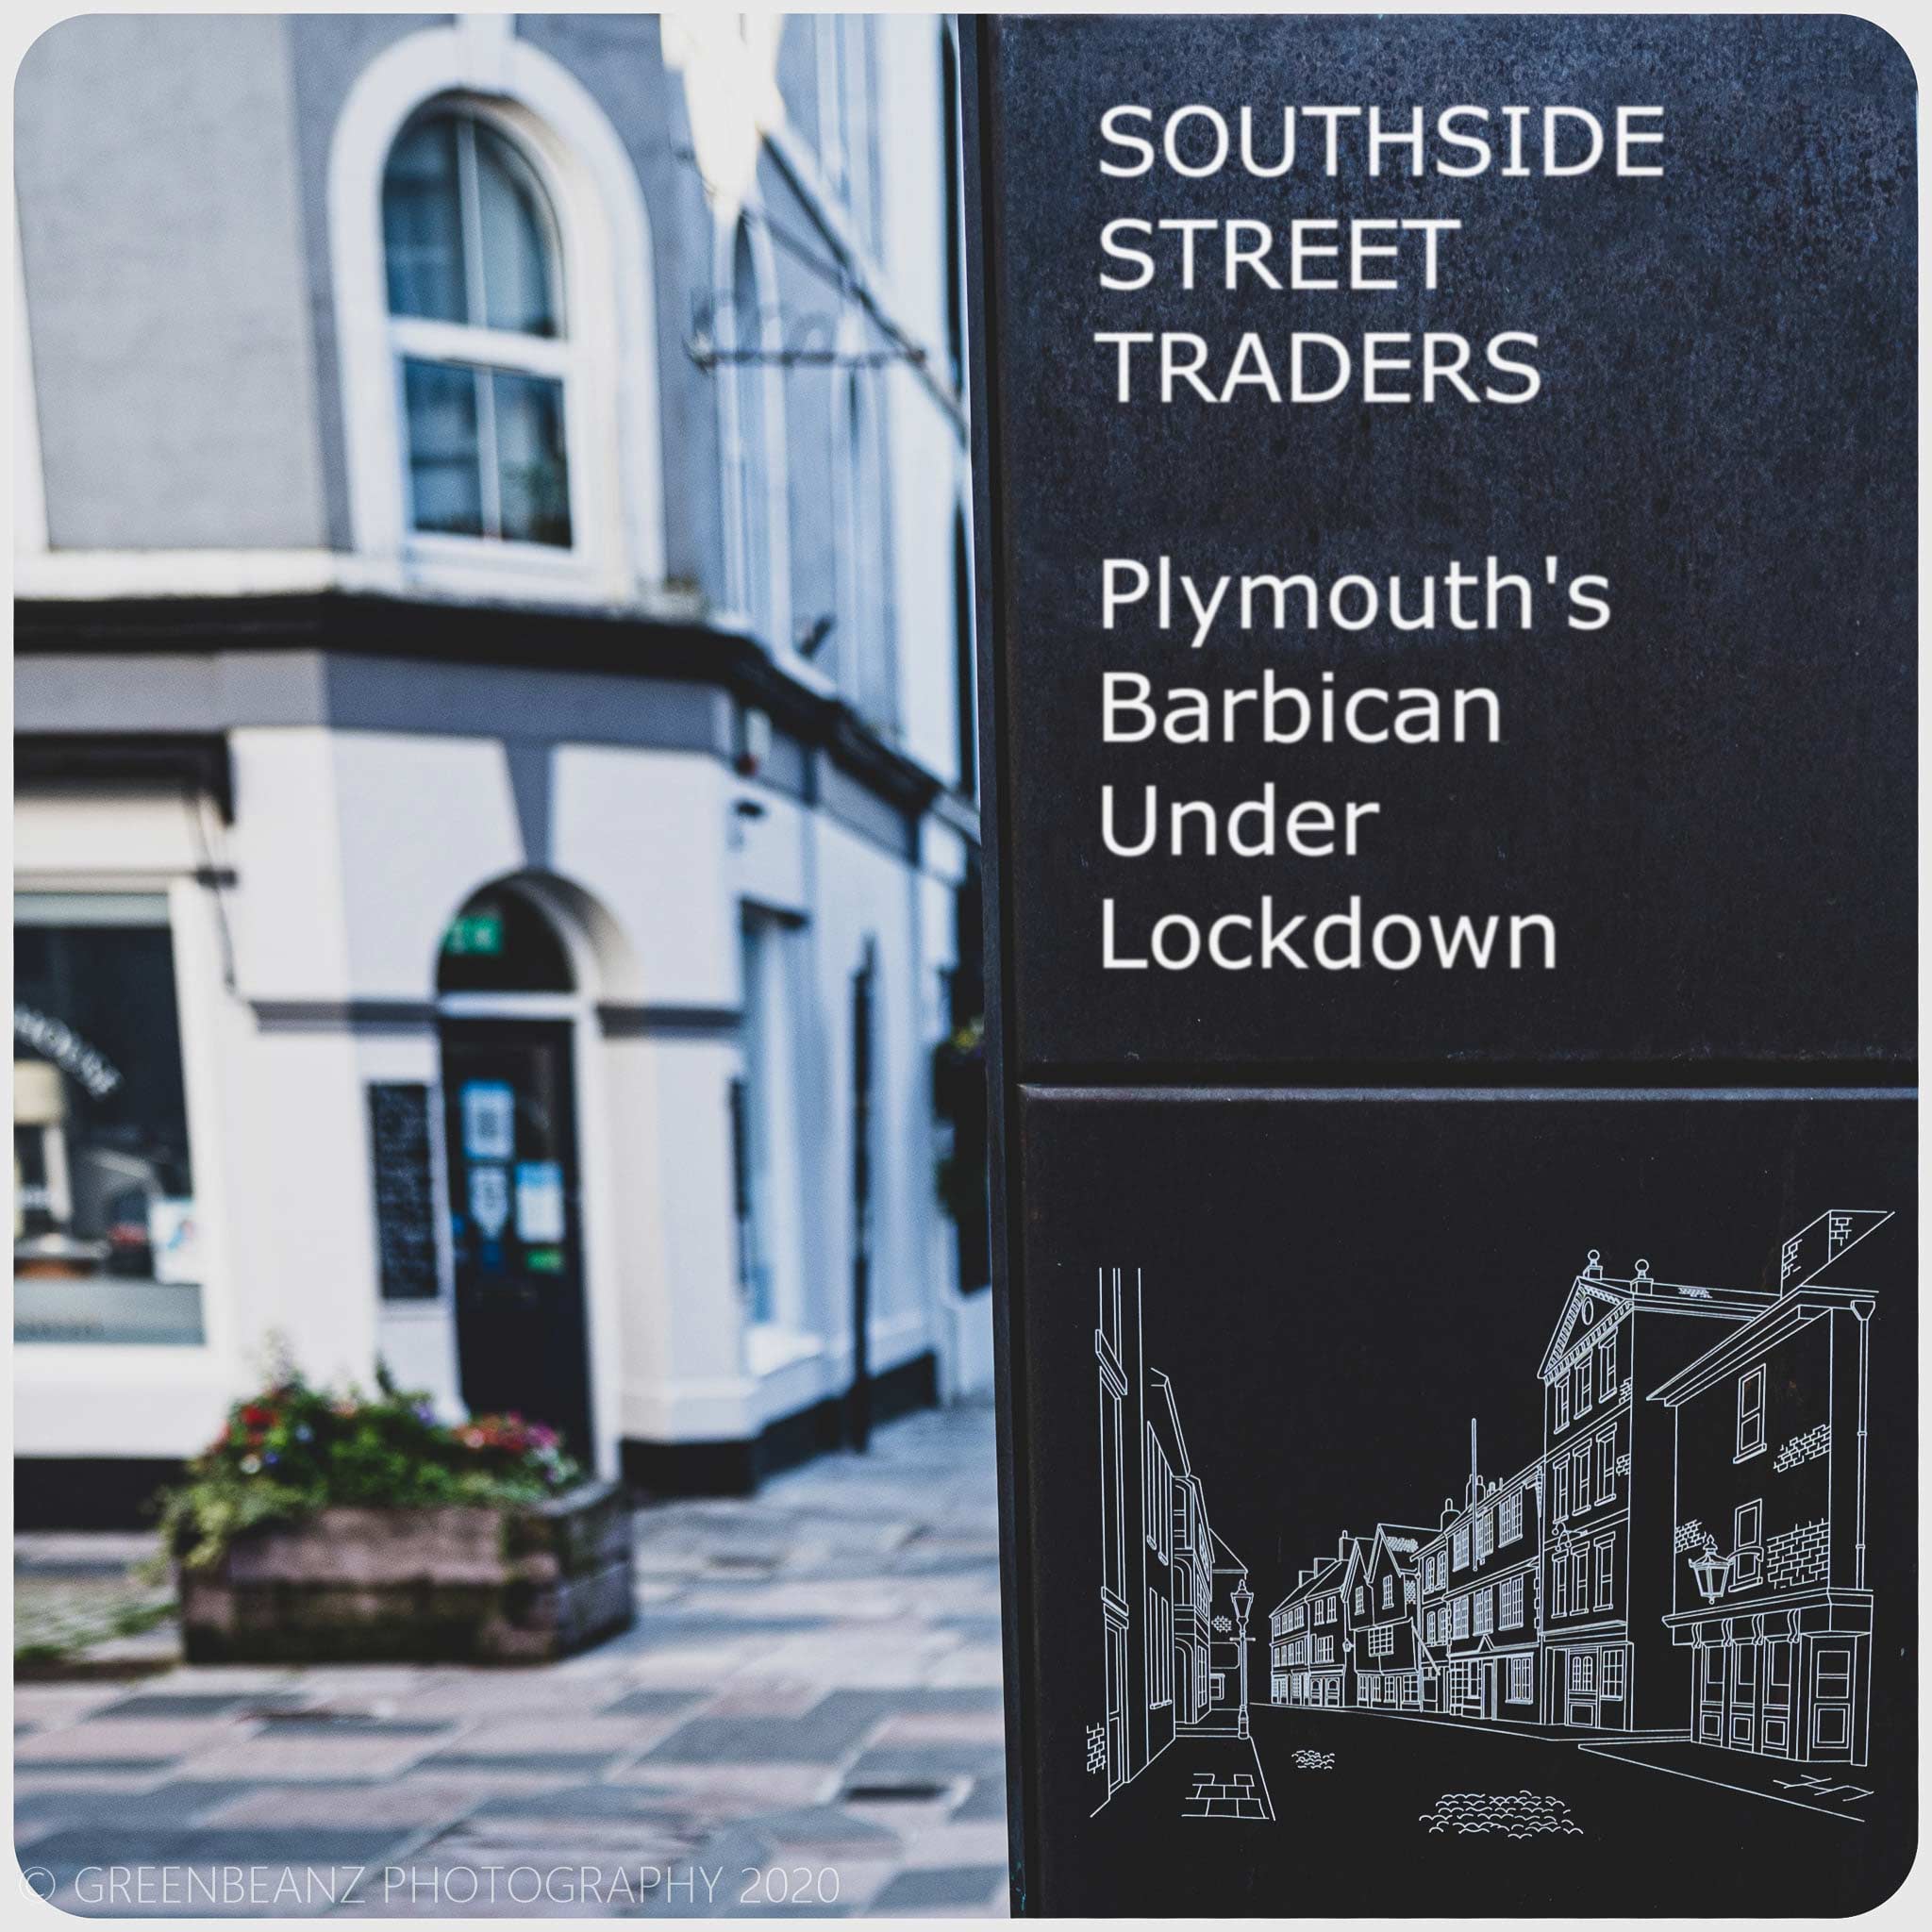 Plymouth Barbican's Southside Street